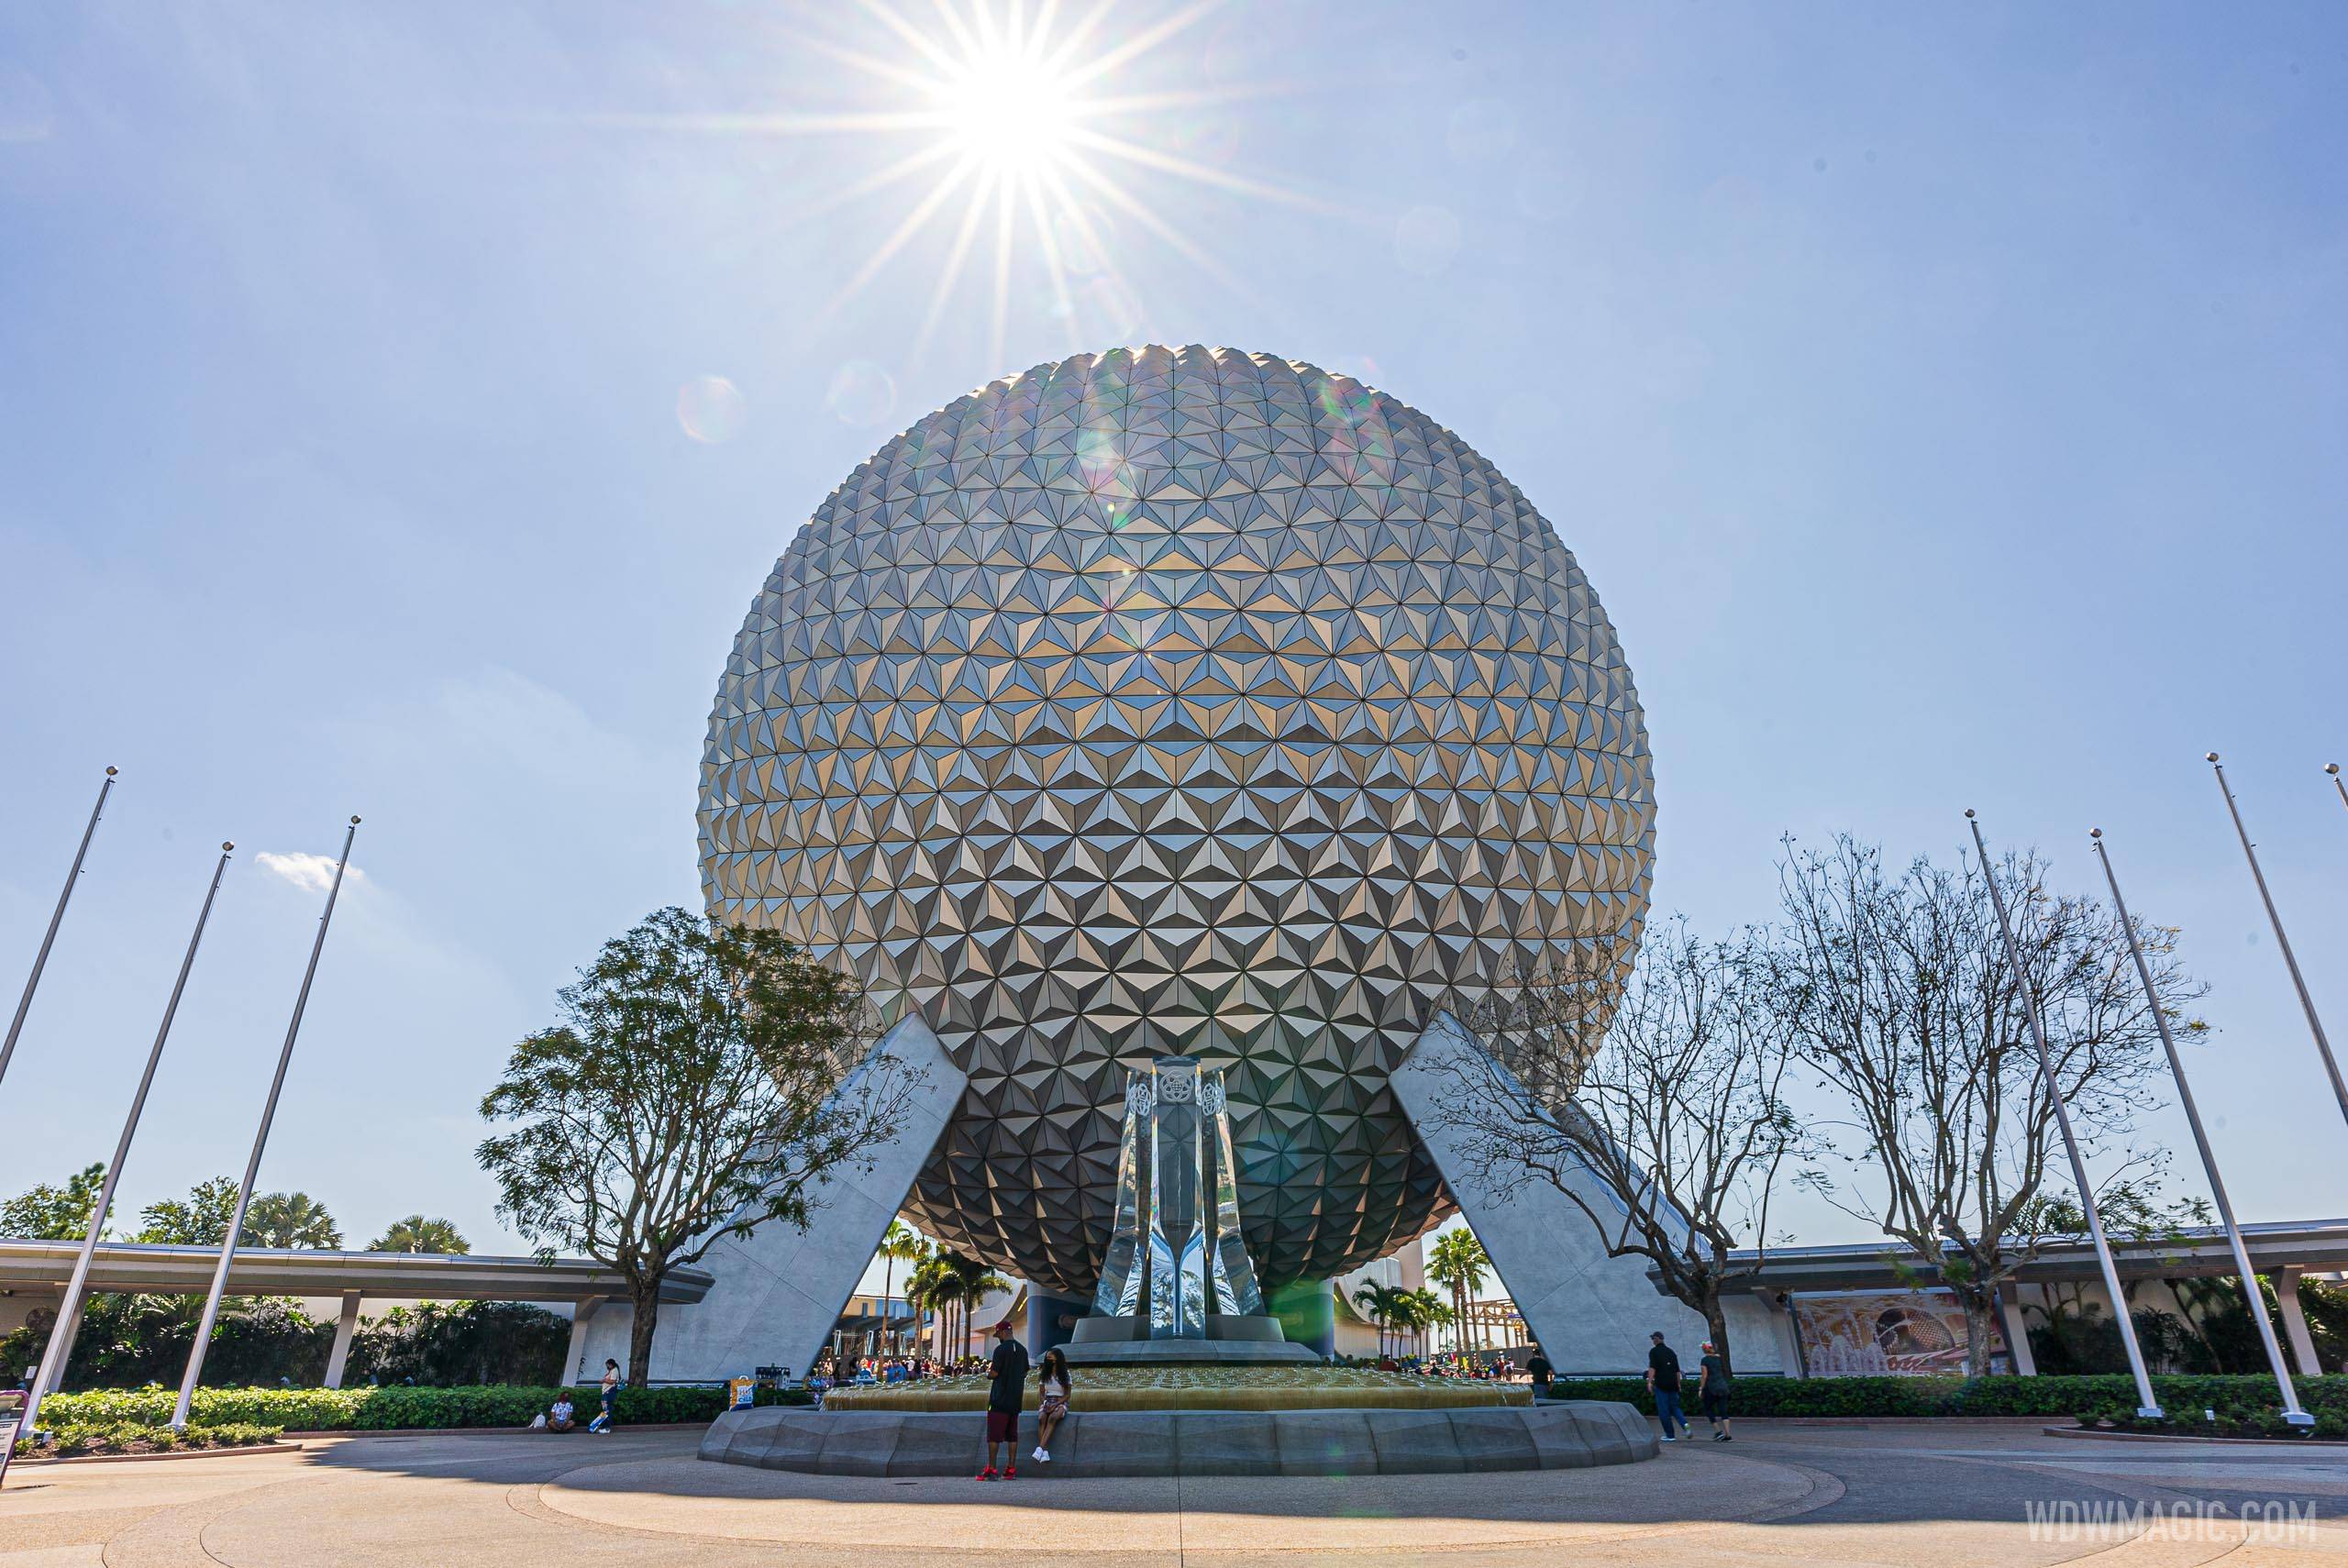 PHOTOS - Western side flag poles installed beside Spaceship Earth as main entrance improvements continue